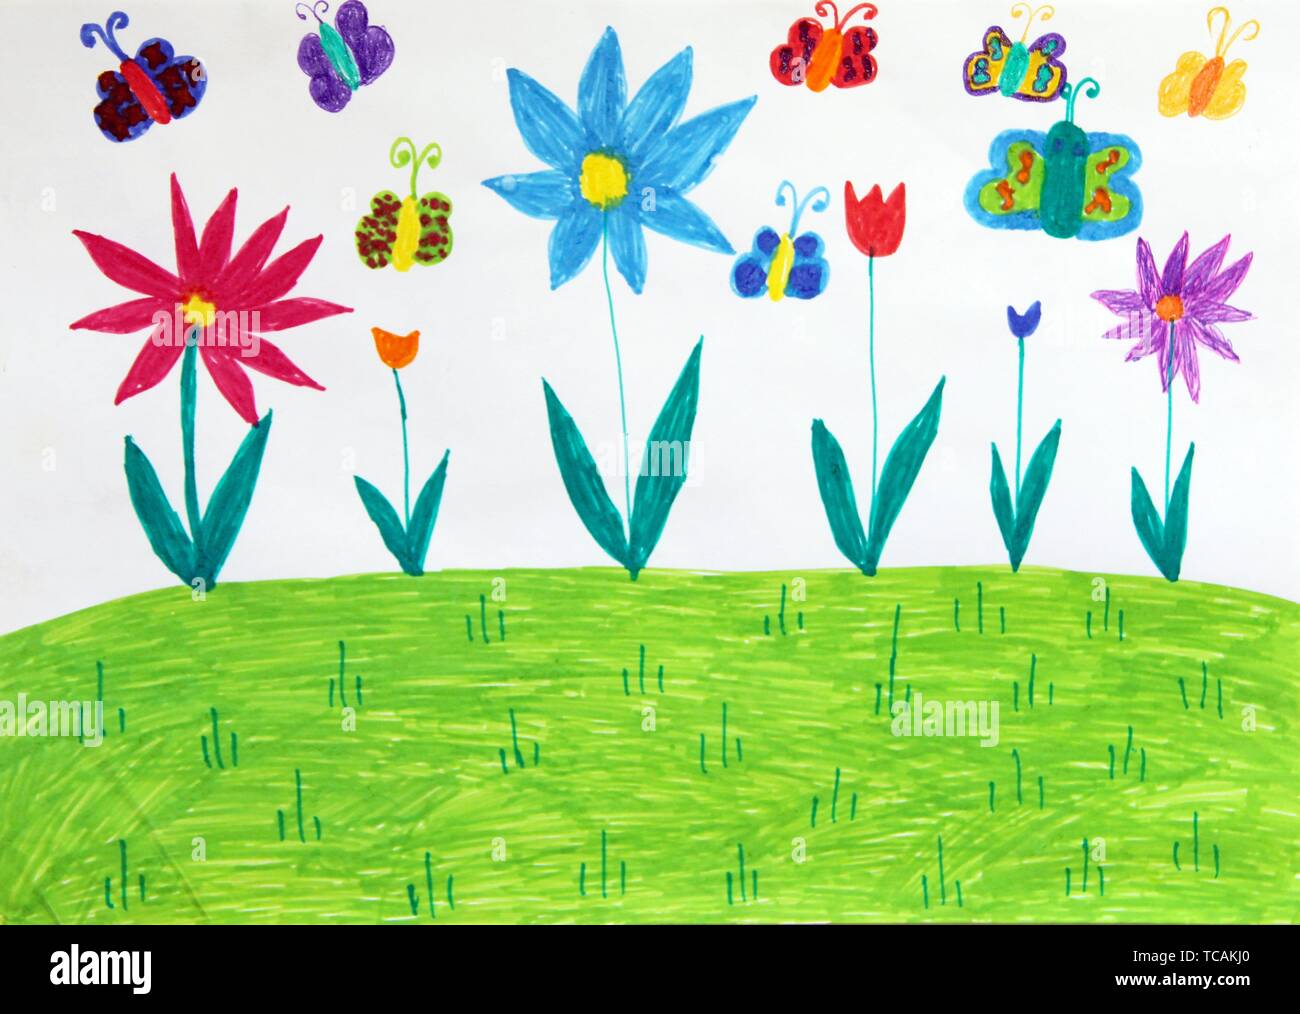 https://c8.alamy.com/comp/TCAKJ0/colored-childrens-drawing-with-butterflies-and-flowers-on-meadow-kids-drawing-with-colorful-flowers-summer-by-eyes-of-children-childish-drawing-TCAKJ0.jpg